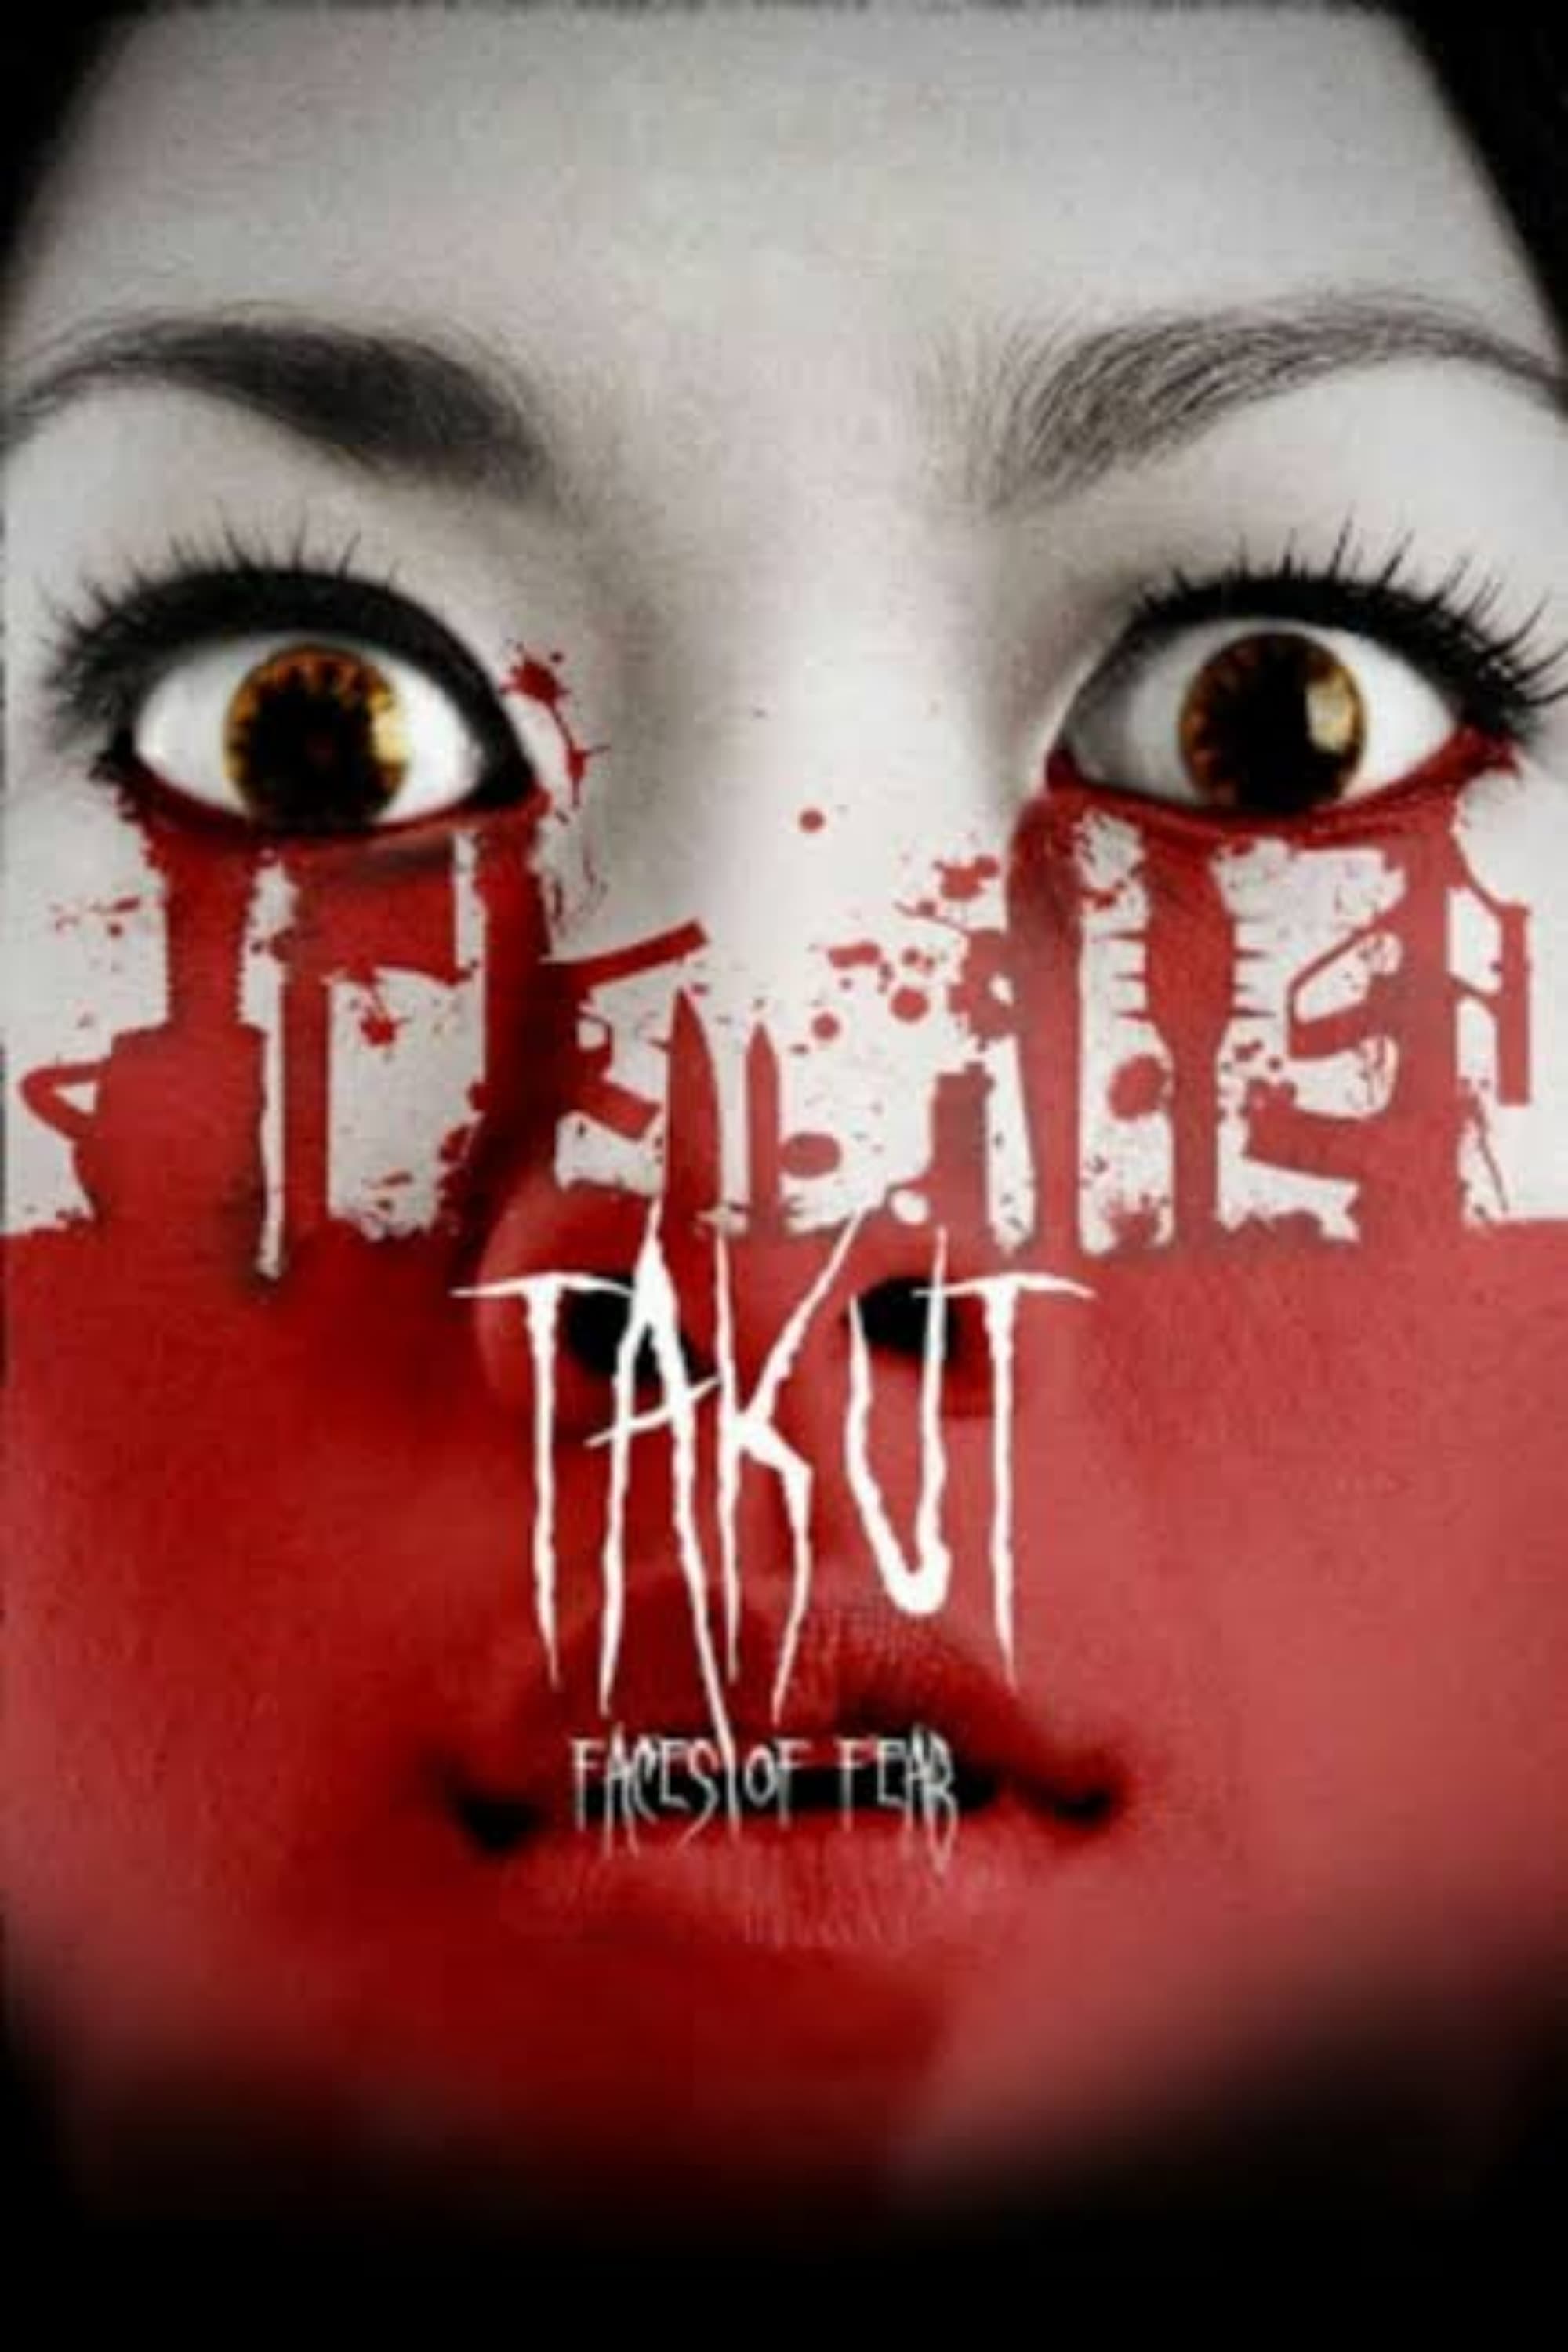 Takut: Faces of Fear (2008)